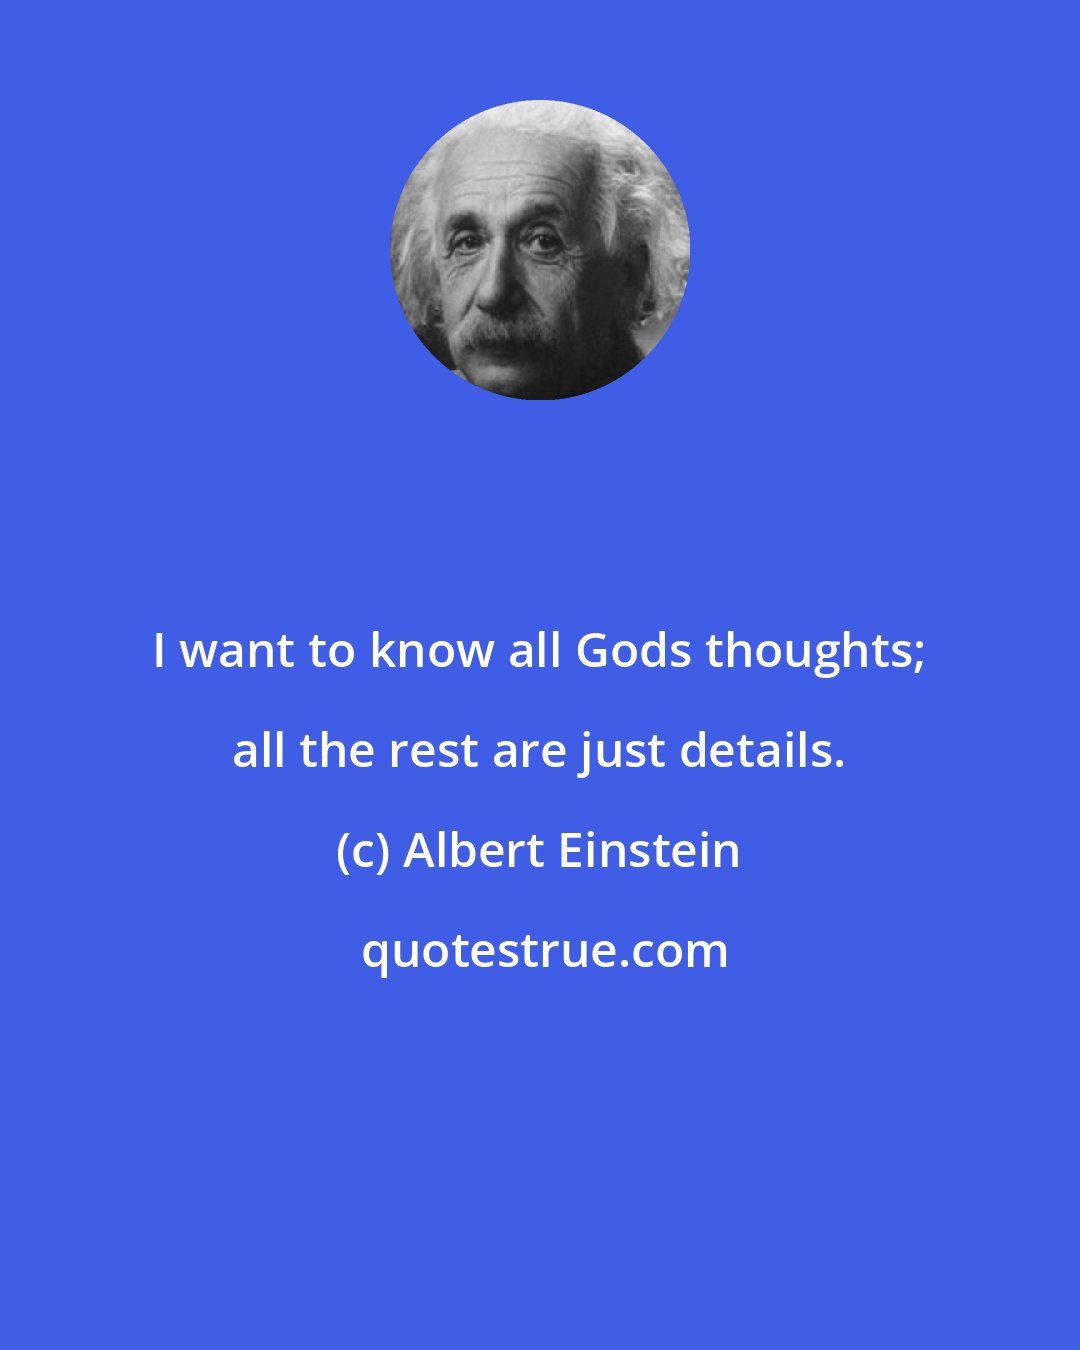 Albert Einstein: I want to know all Gods thoughts; all the rest are just details.